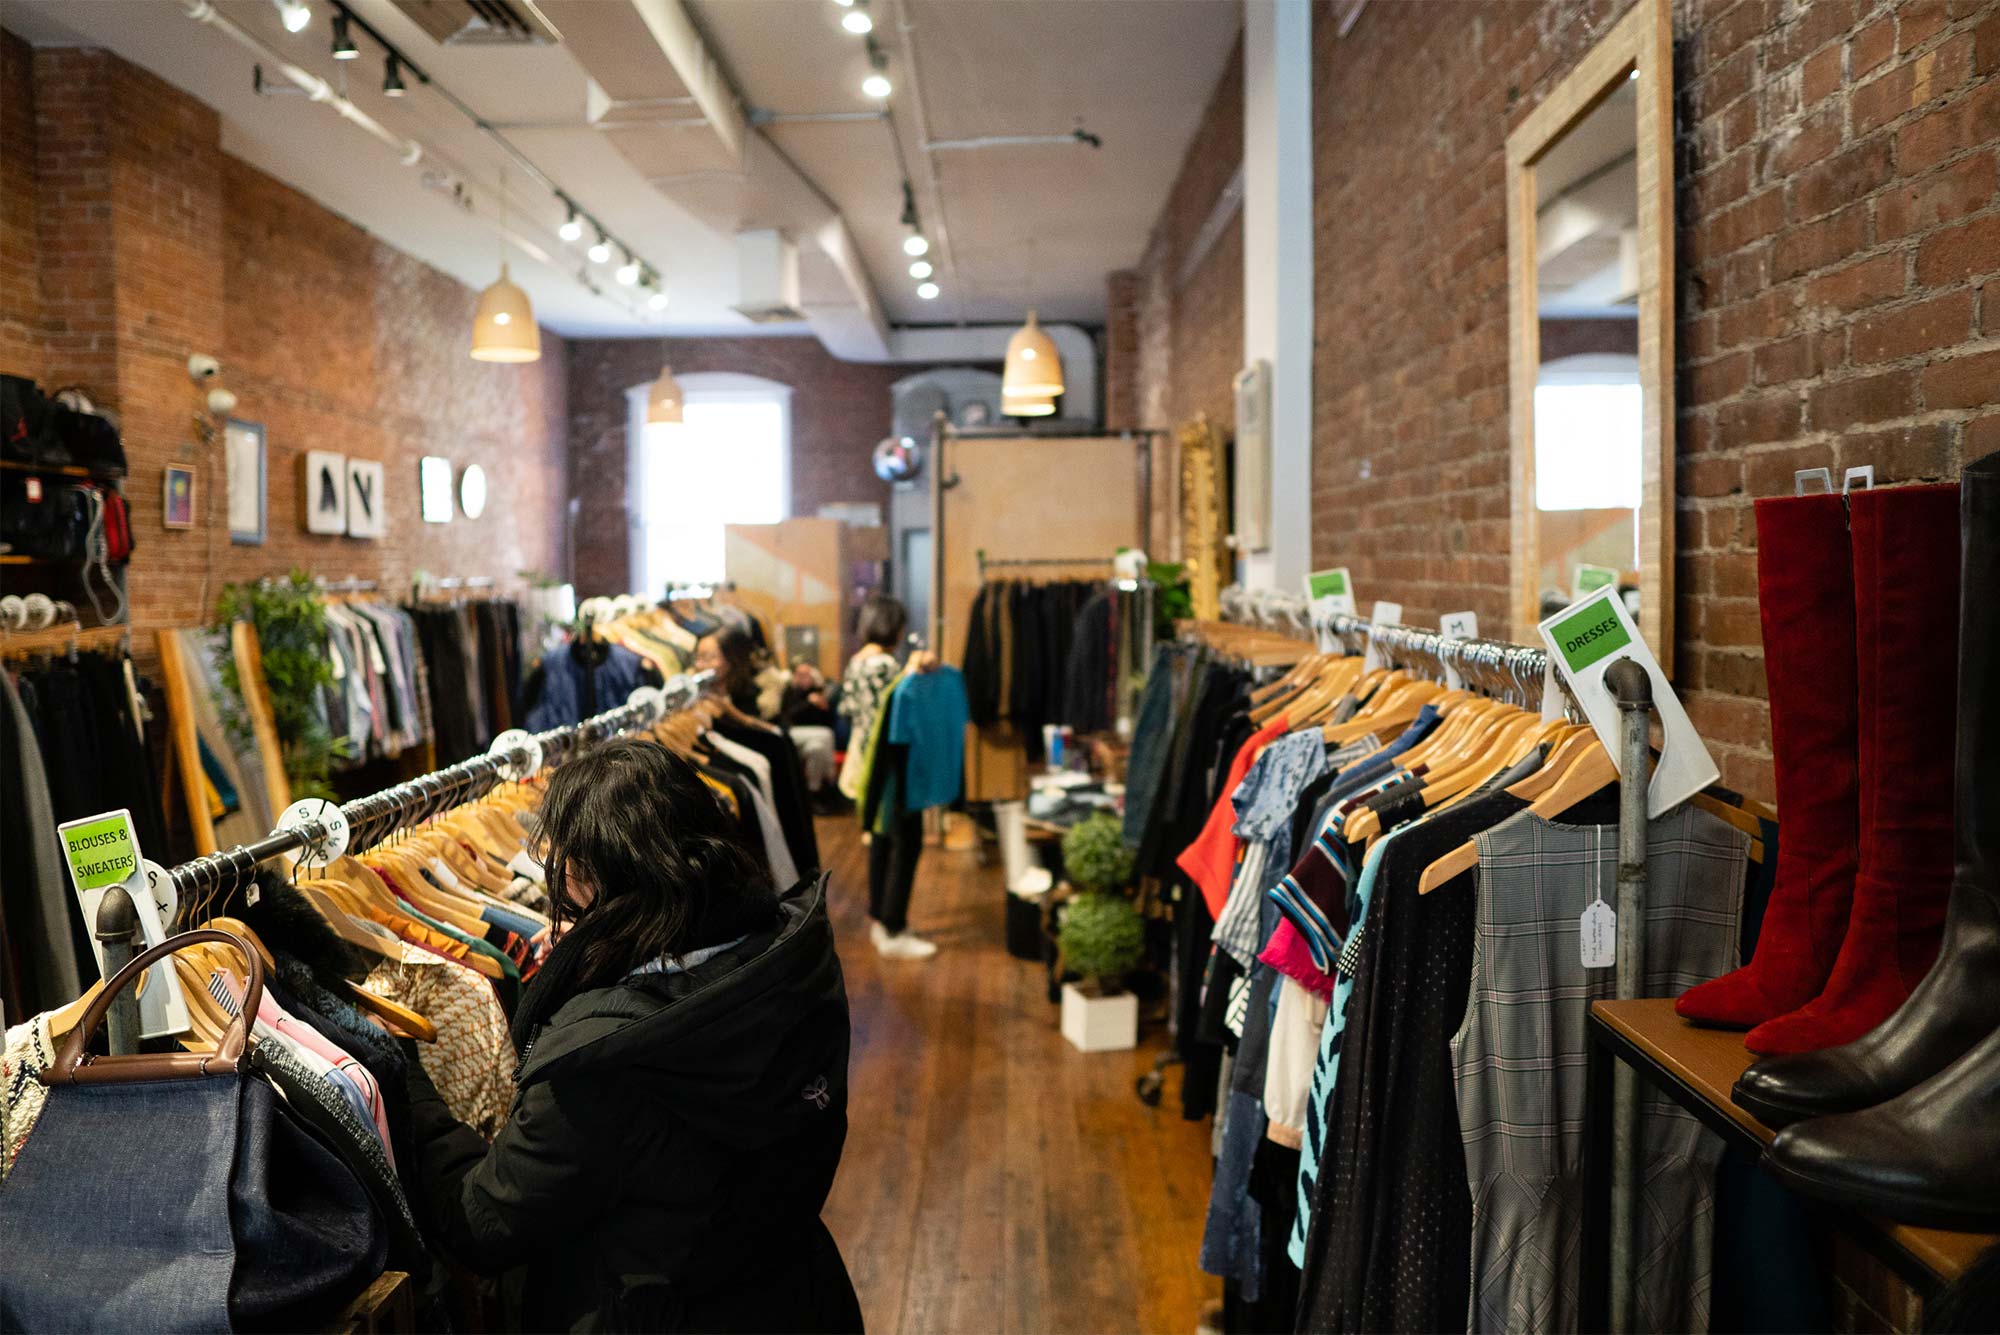 Interior view of Boomerangs Special Edition thrift shop located at 1407 Washington St. in Boston's South End neighborhood.